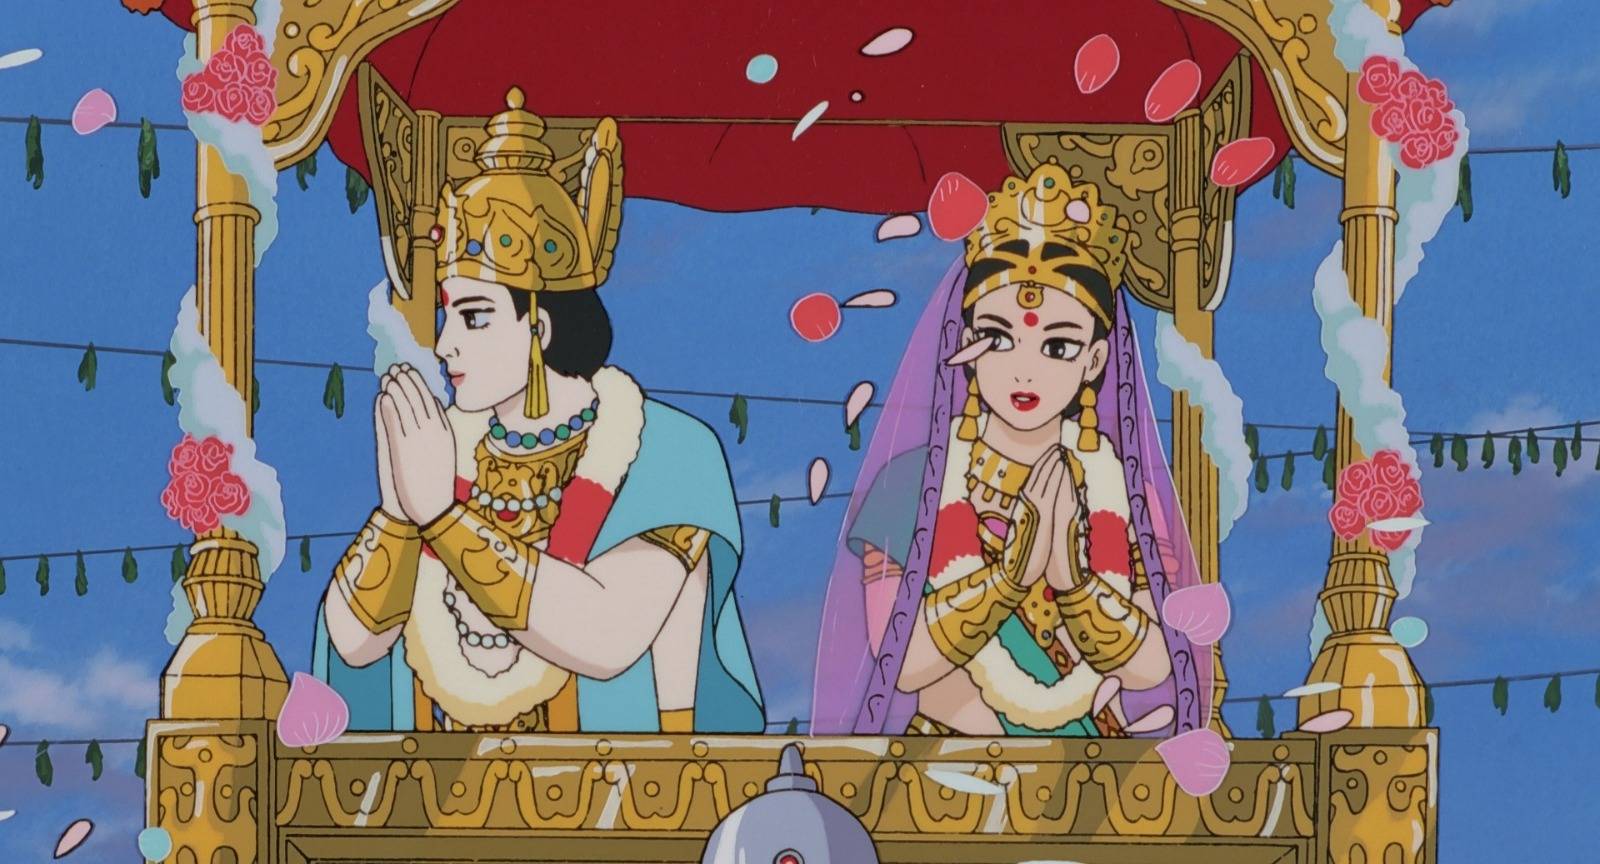 Groundbreaking 'Ramayana' anime remastered for new audience 30 years on. The Japan Times